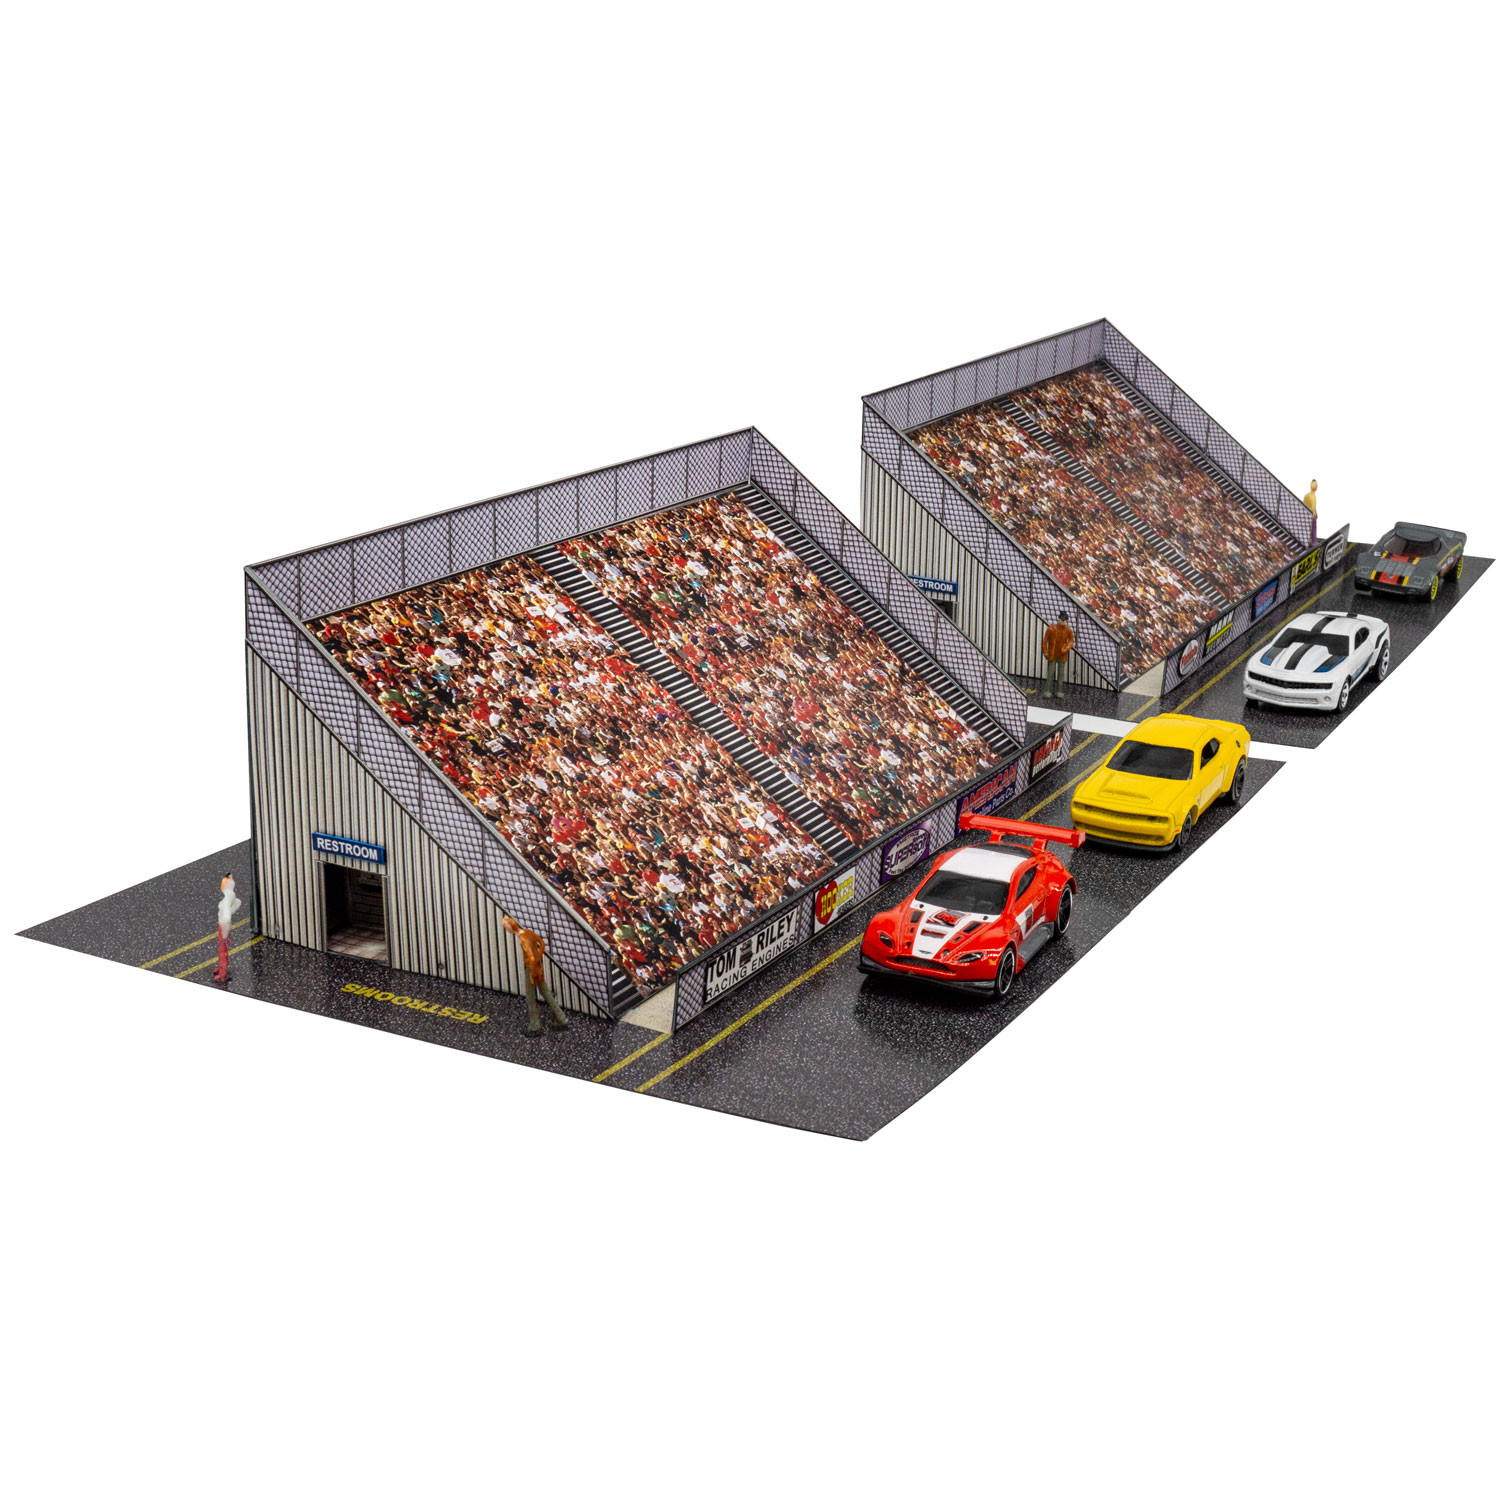 BK 6462 1:64 Scale "Bleachers With Crowd" Photo Real Scale Building Kit